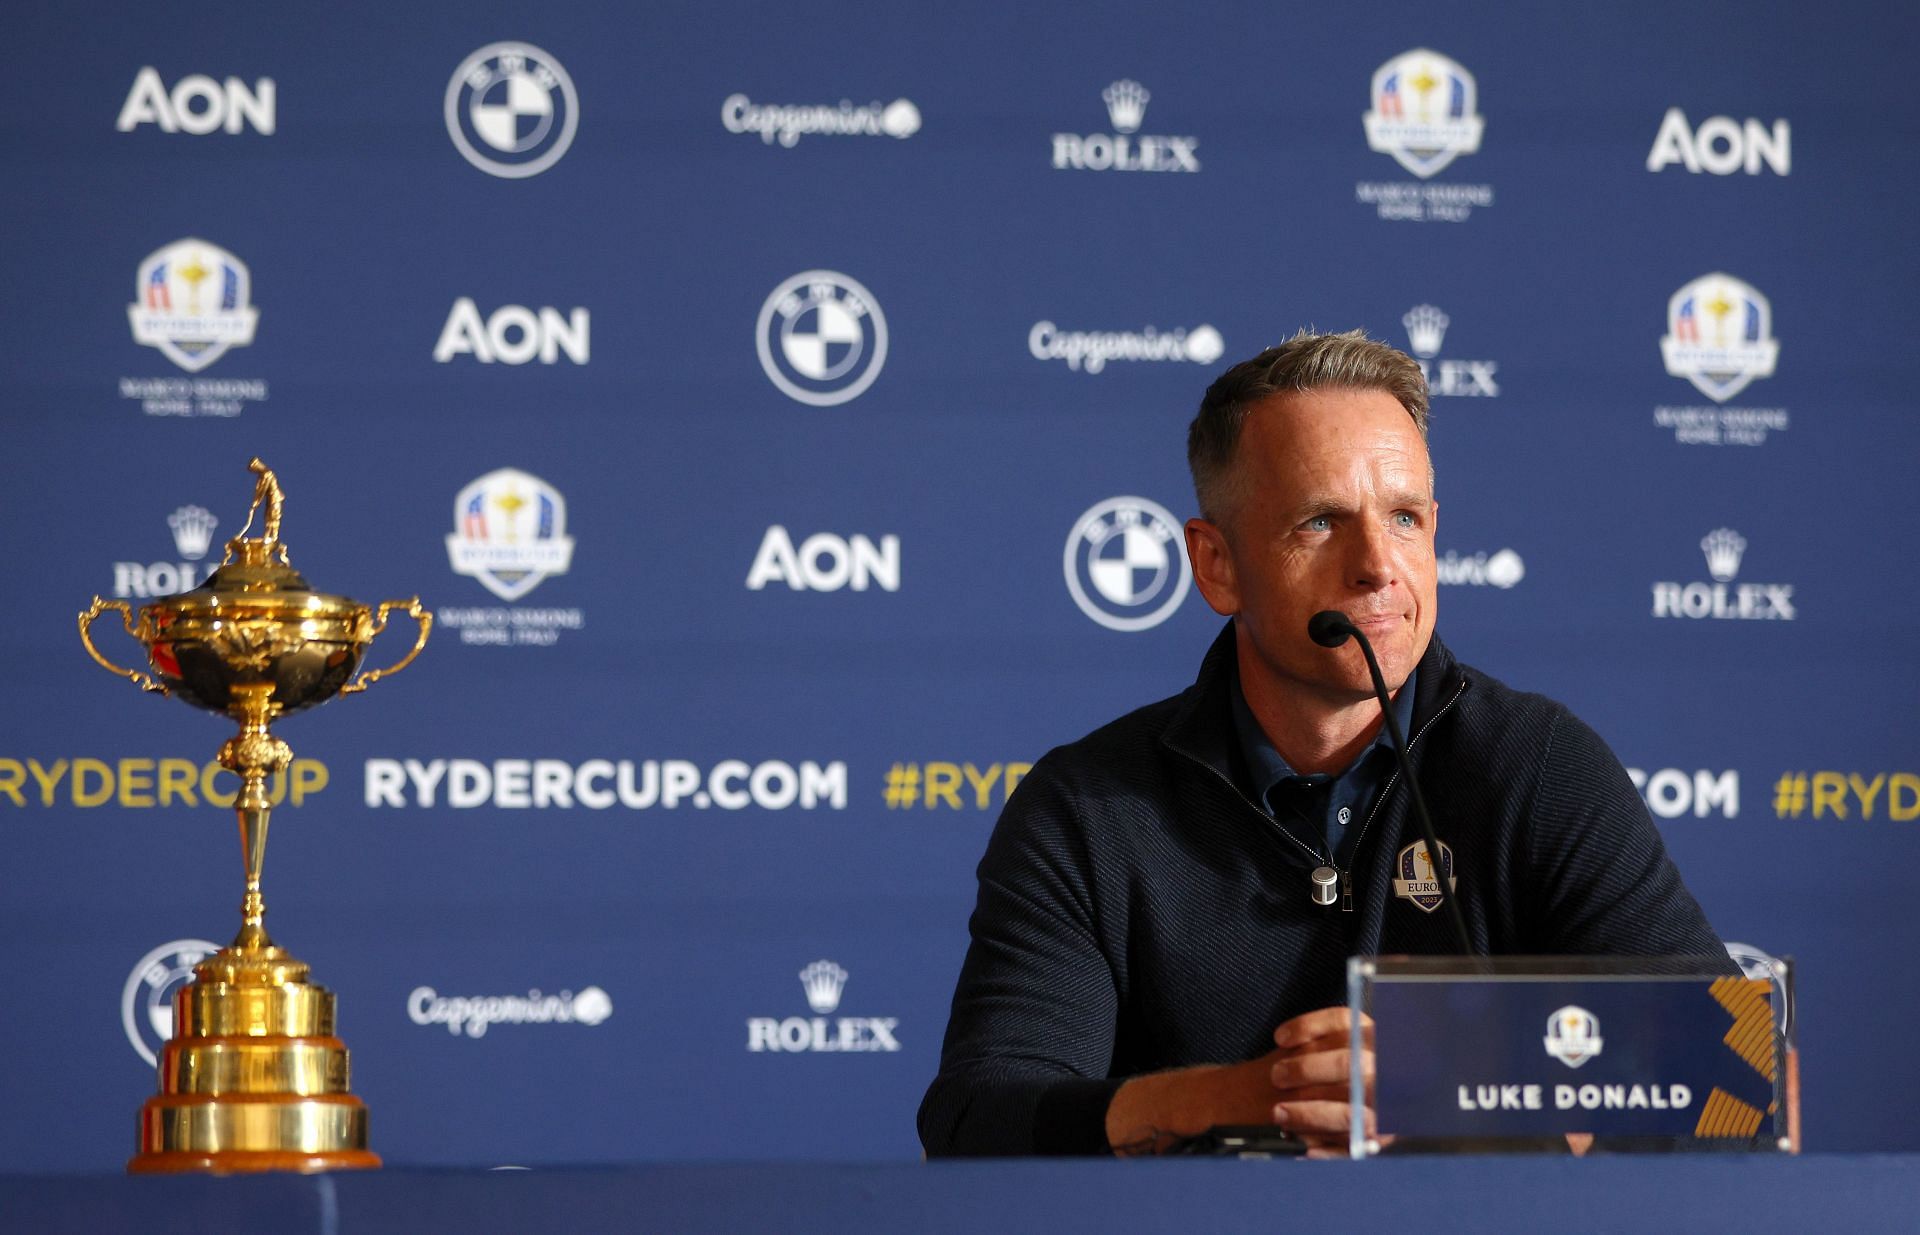 Ryder Cup 2023 Year to Go Media Event - Day Three